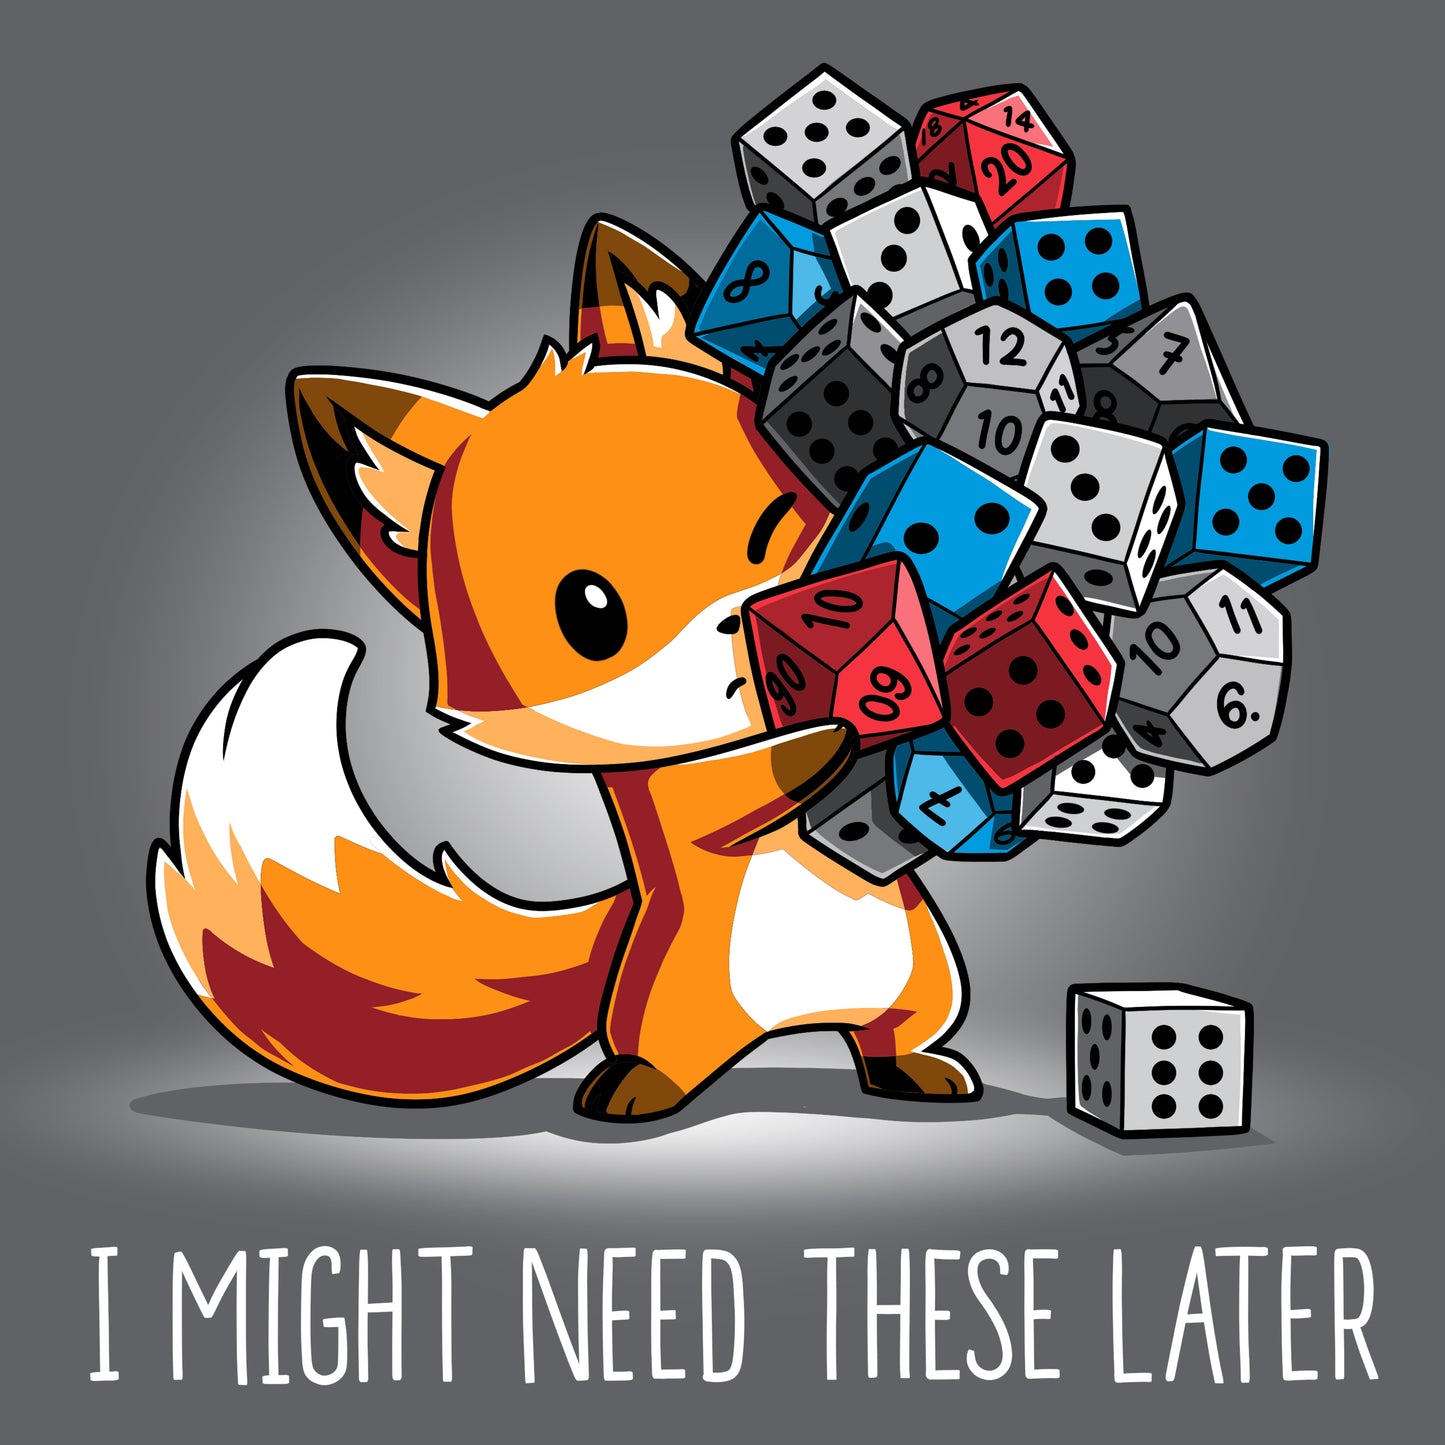 A TeeTurtle "I Might Need These Later" Dice holding dice on a charcoal gray t-shirt.